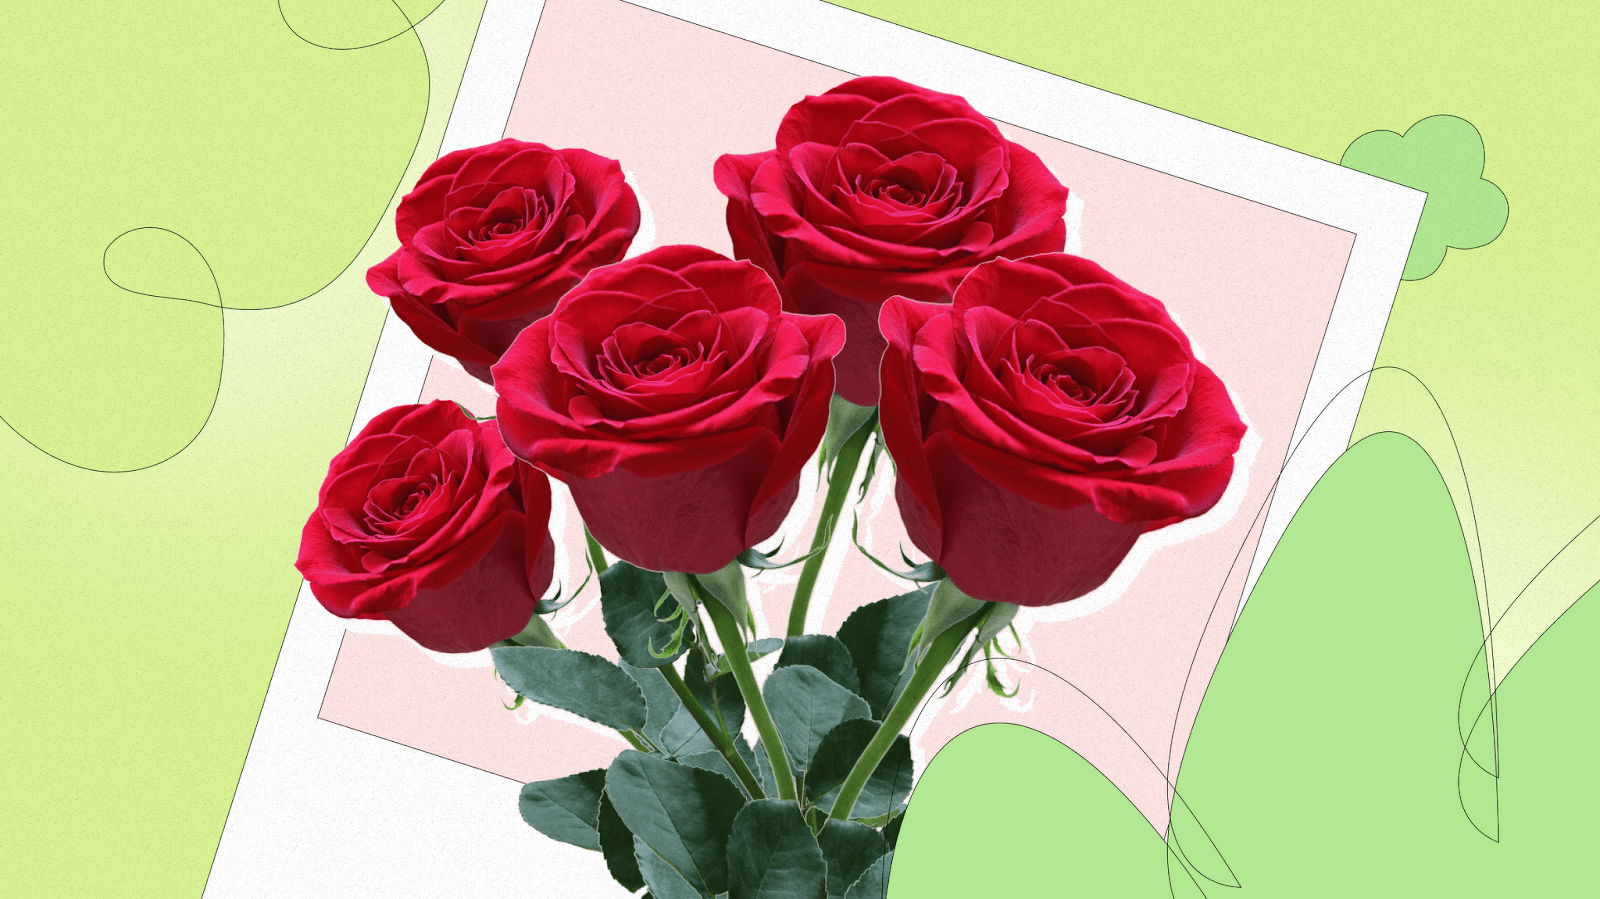 What do red roses mean?